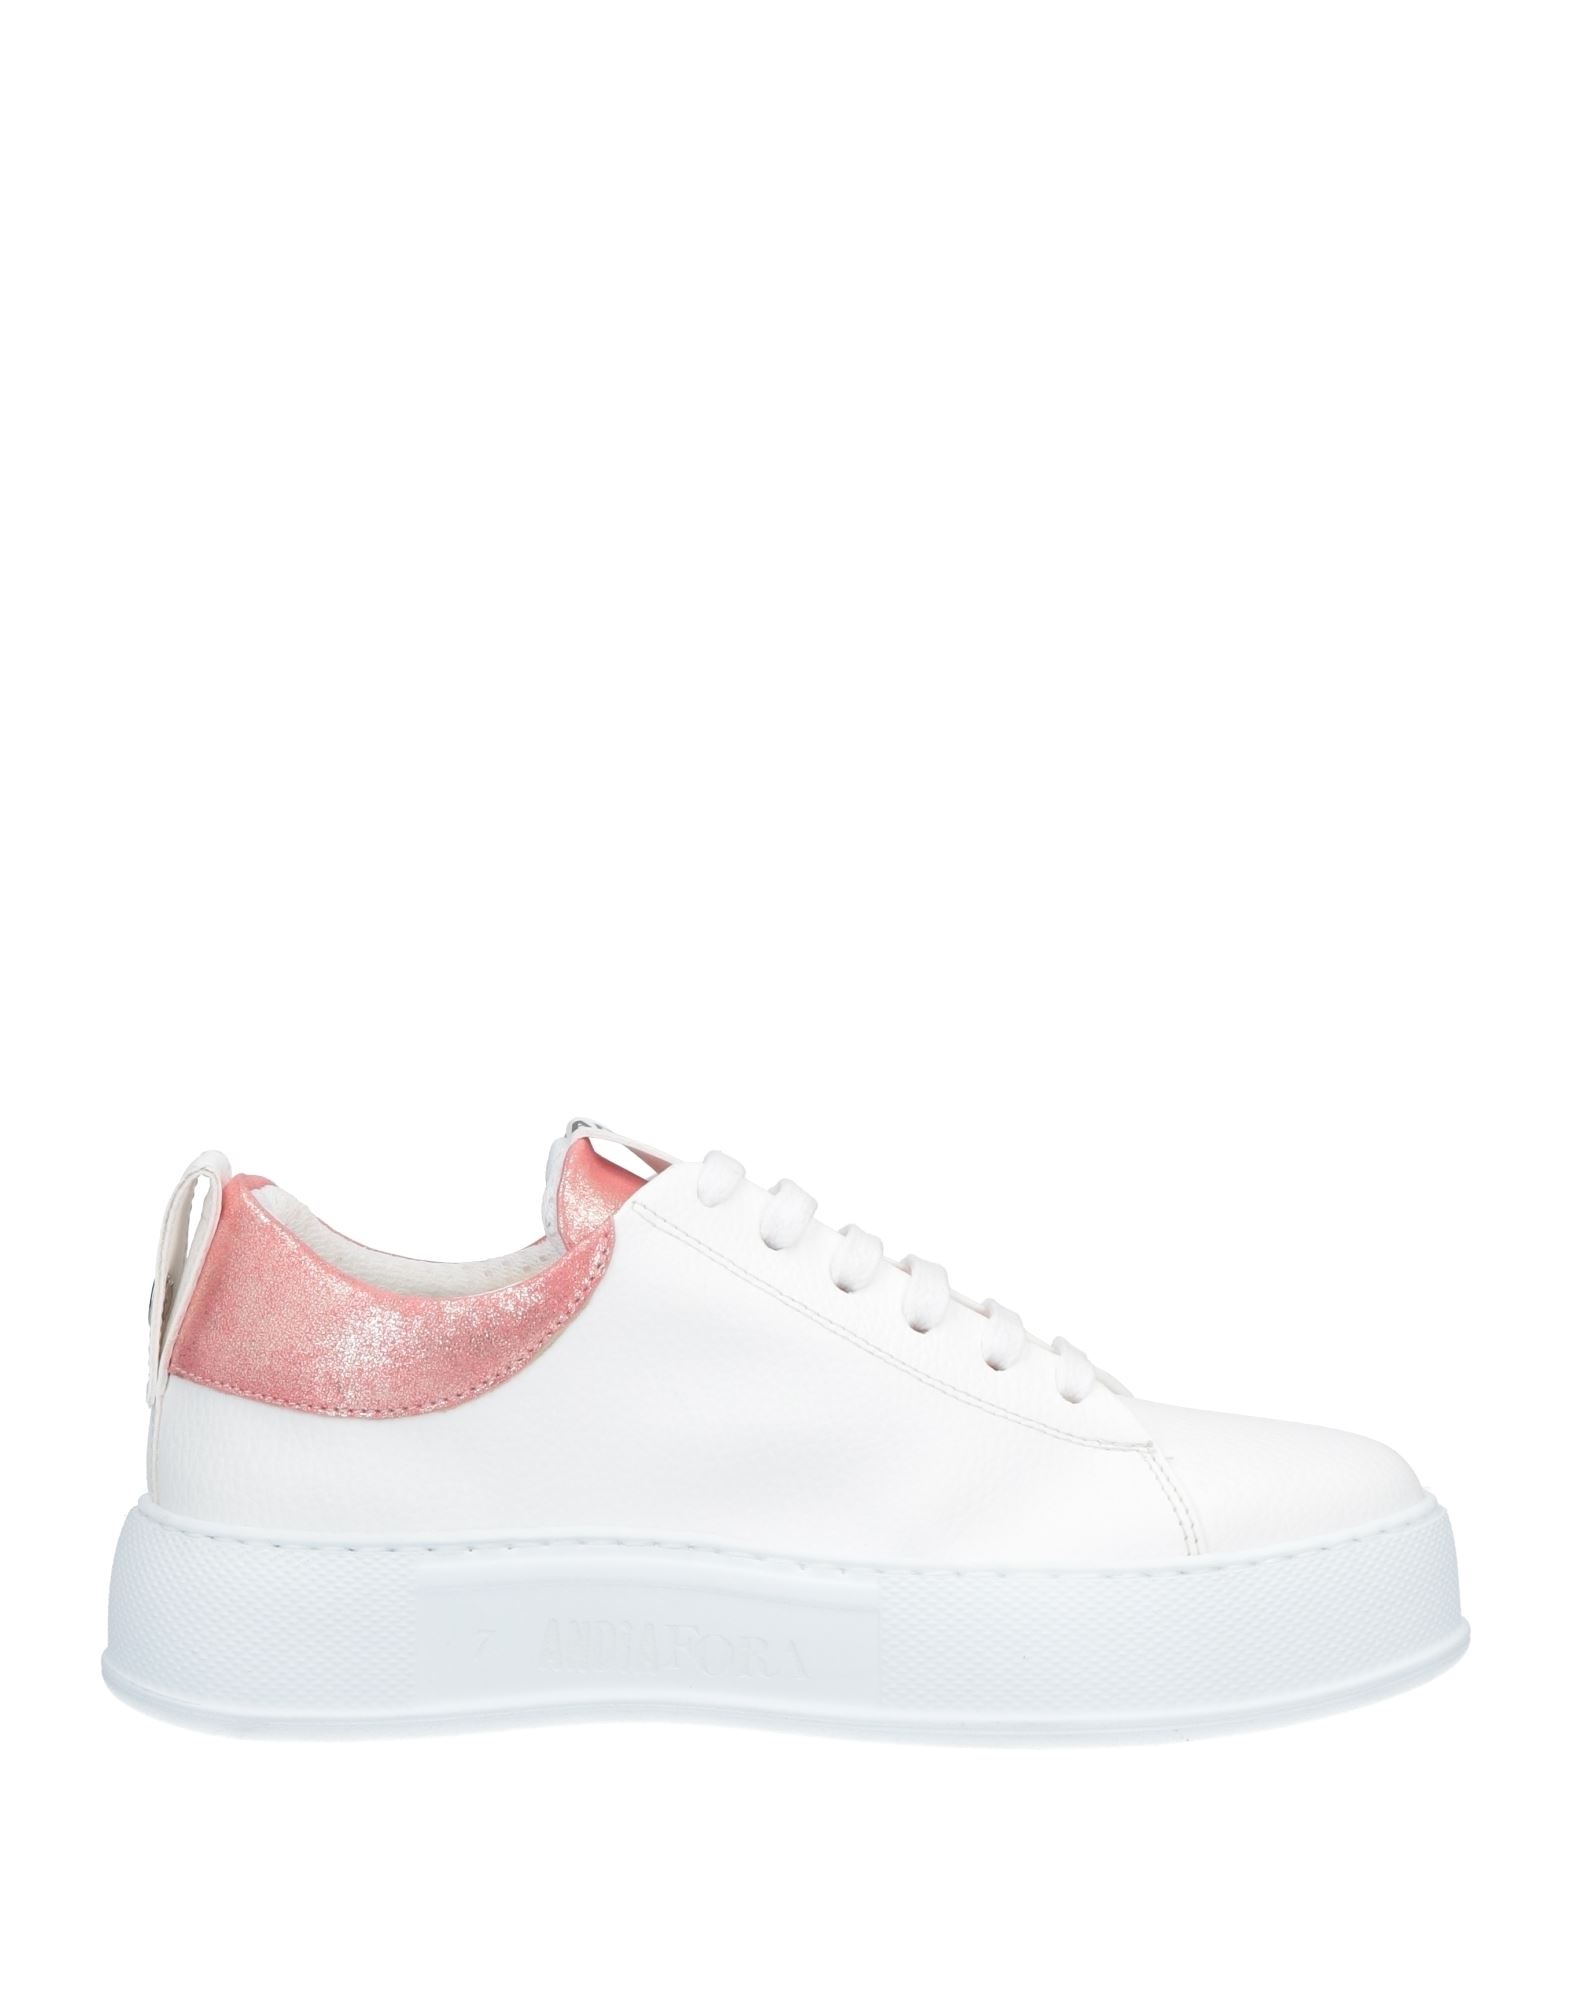 Shop Andìa Fora Woman Sneakers White Size 5 Soft Leather